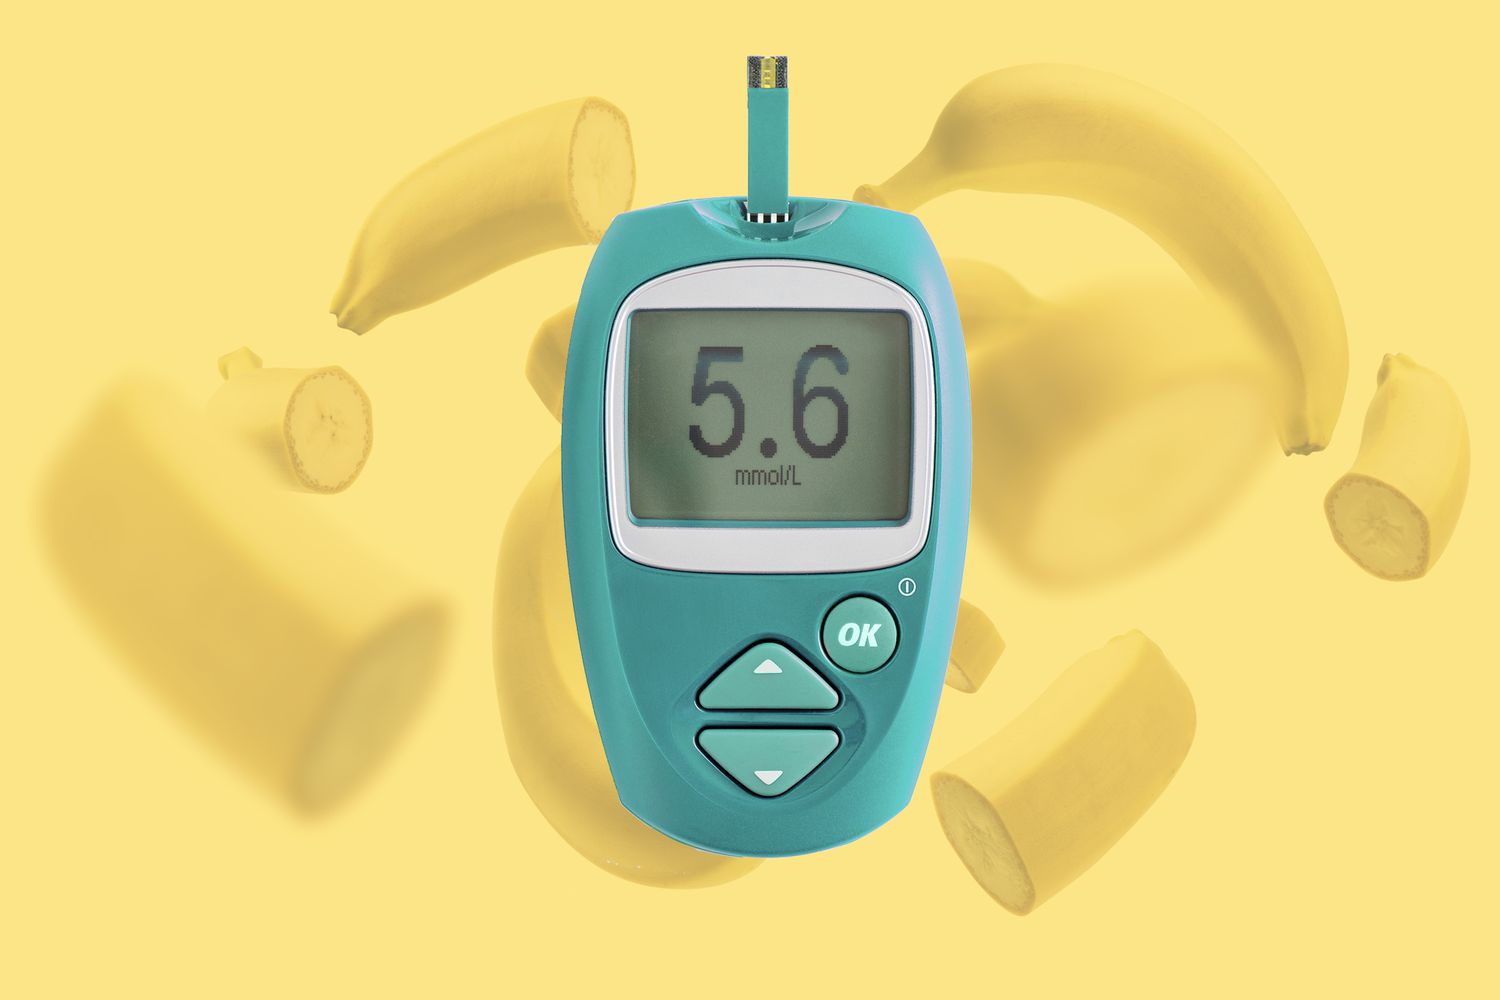 a collage of banana in the background with a glucose meter